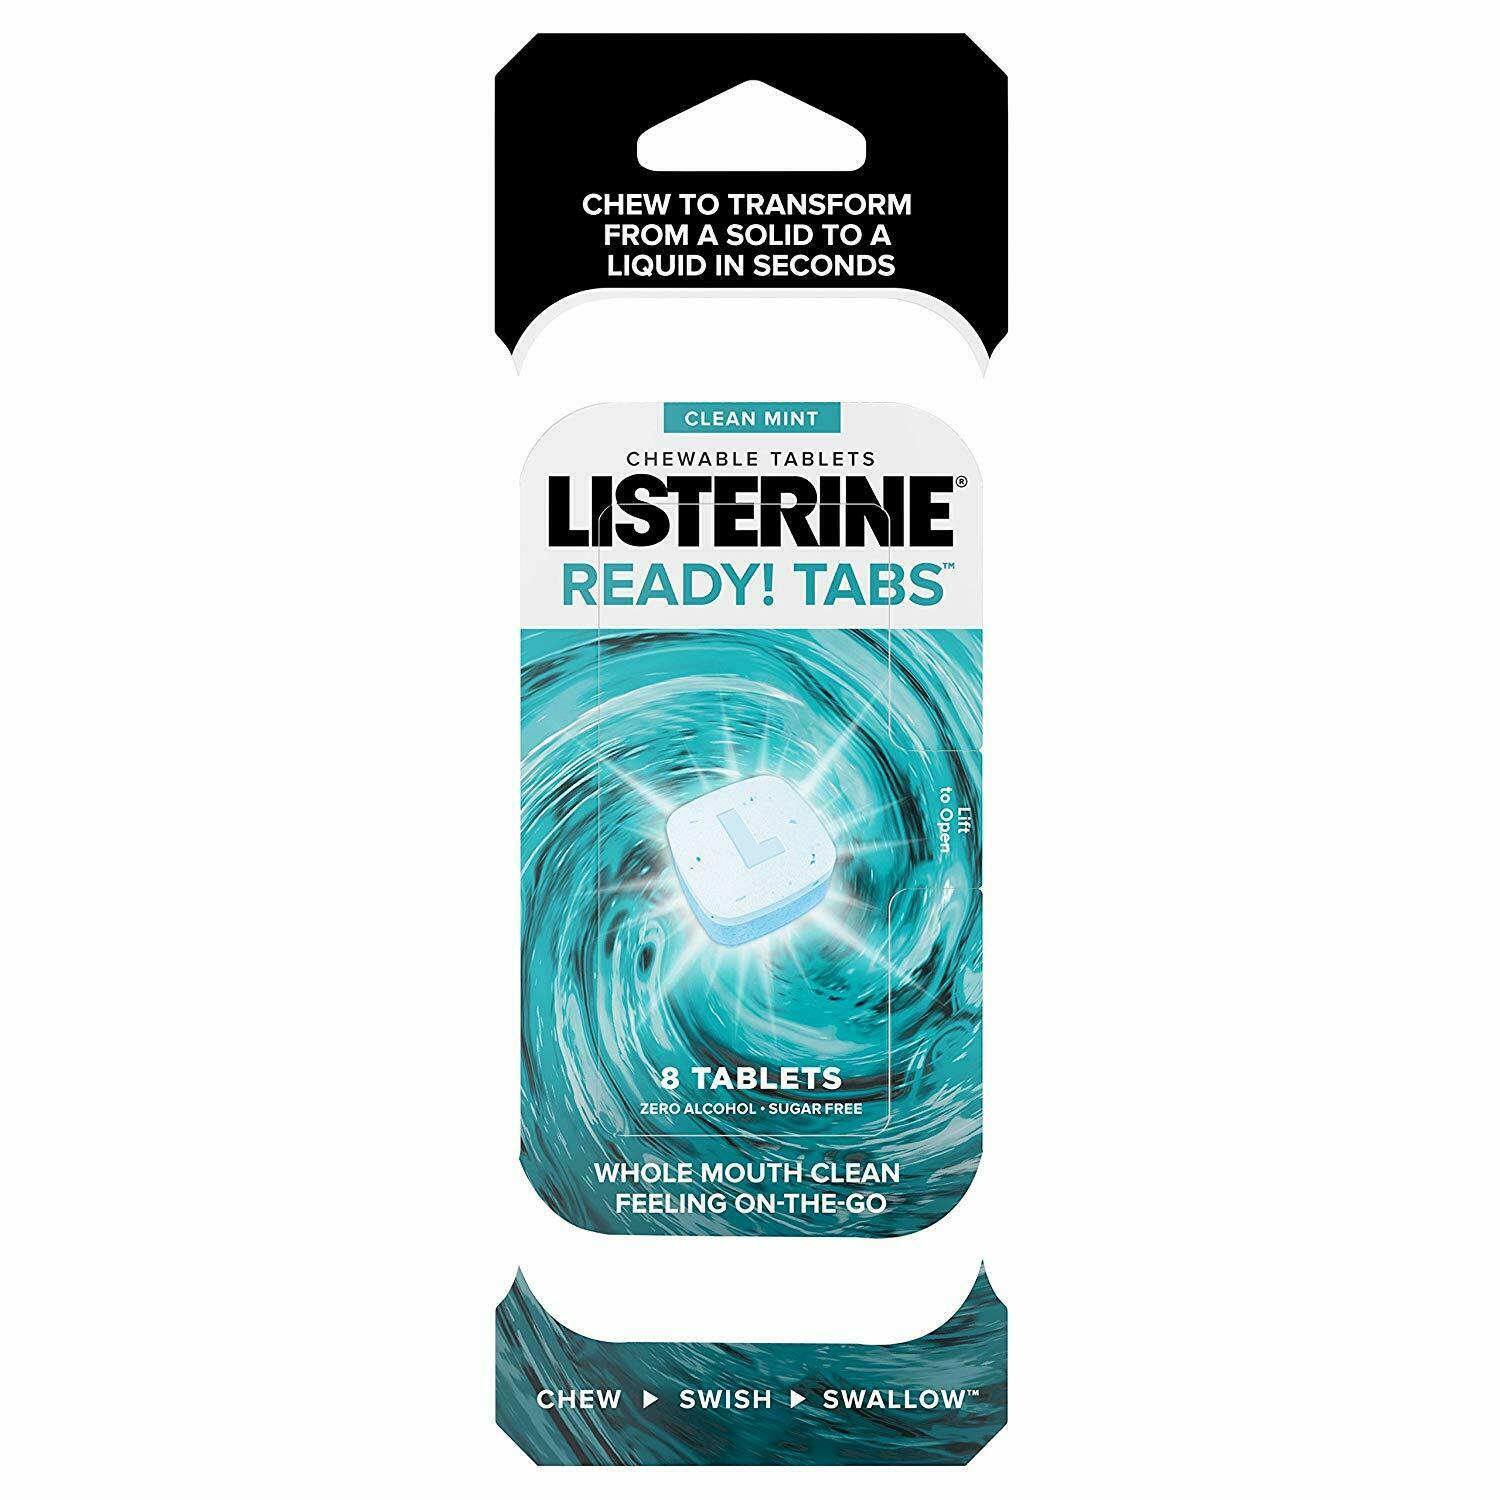 Listerine Ready! Tabs 8 Count (3 Pack)